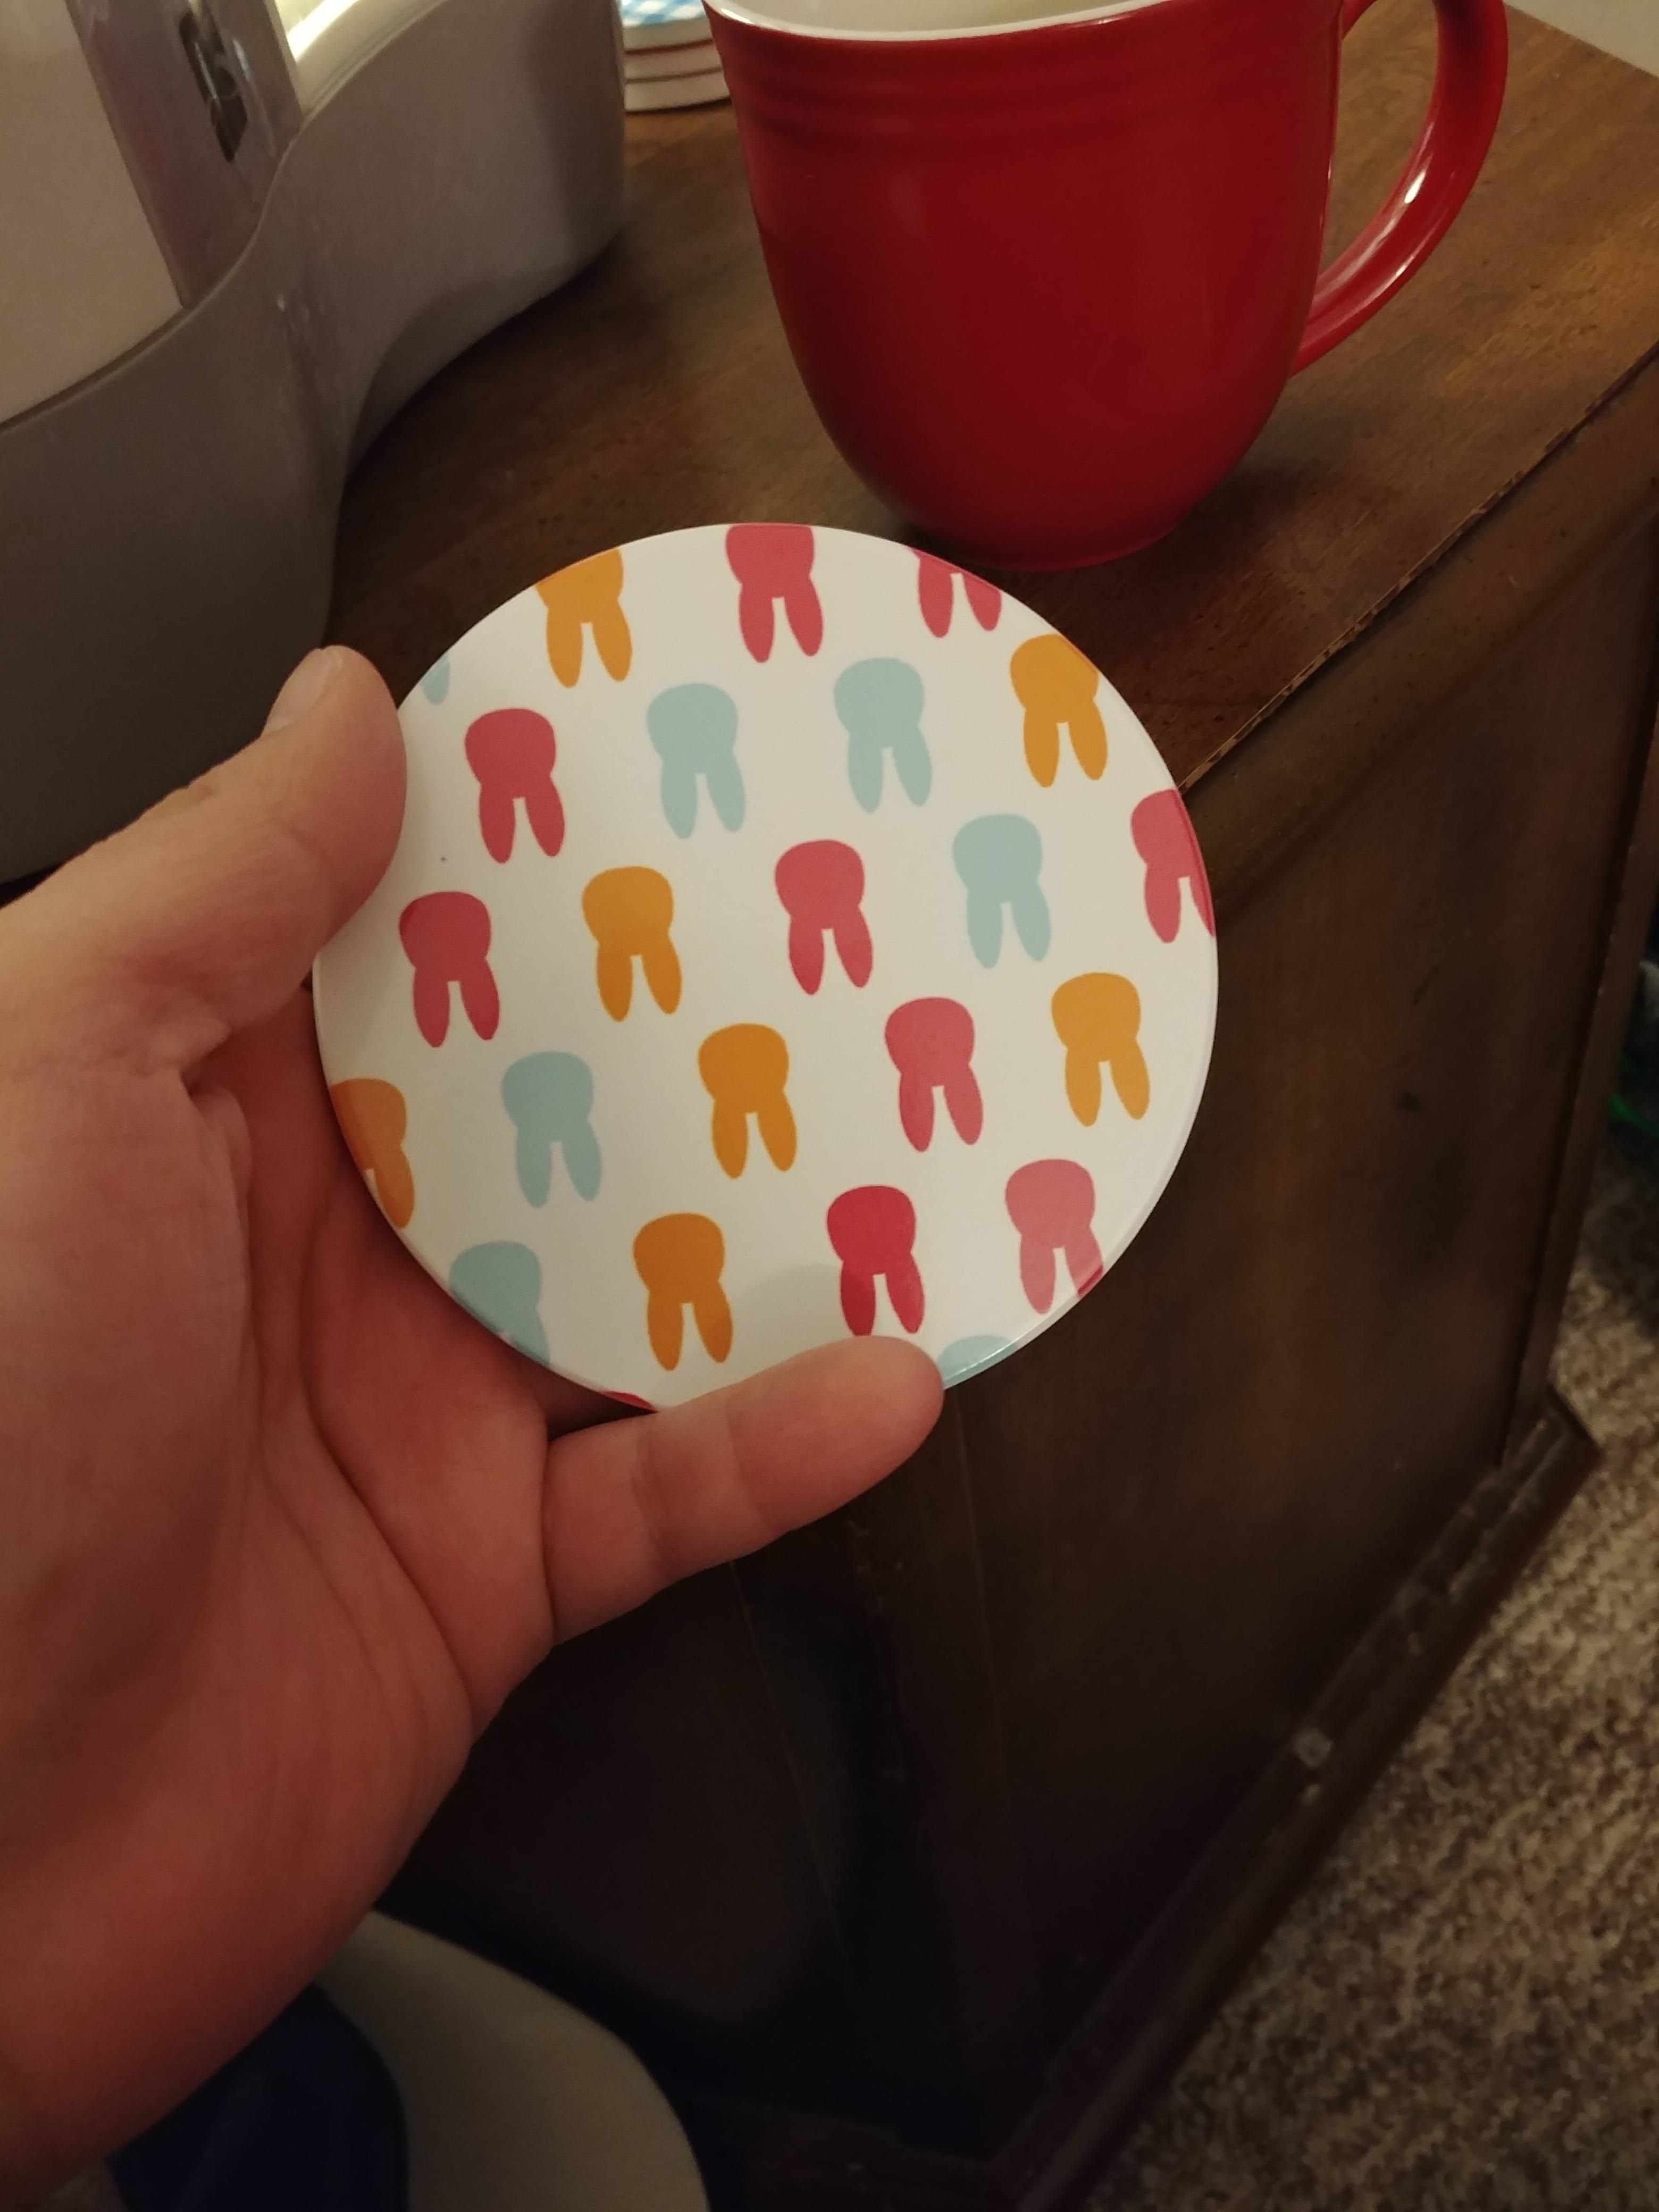 I've had this weird tooth coaster for years... Today realized I'm a total idiot